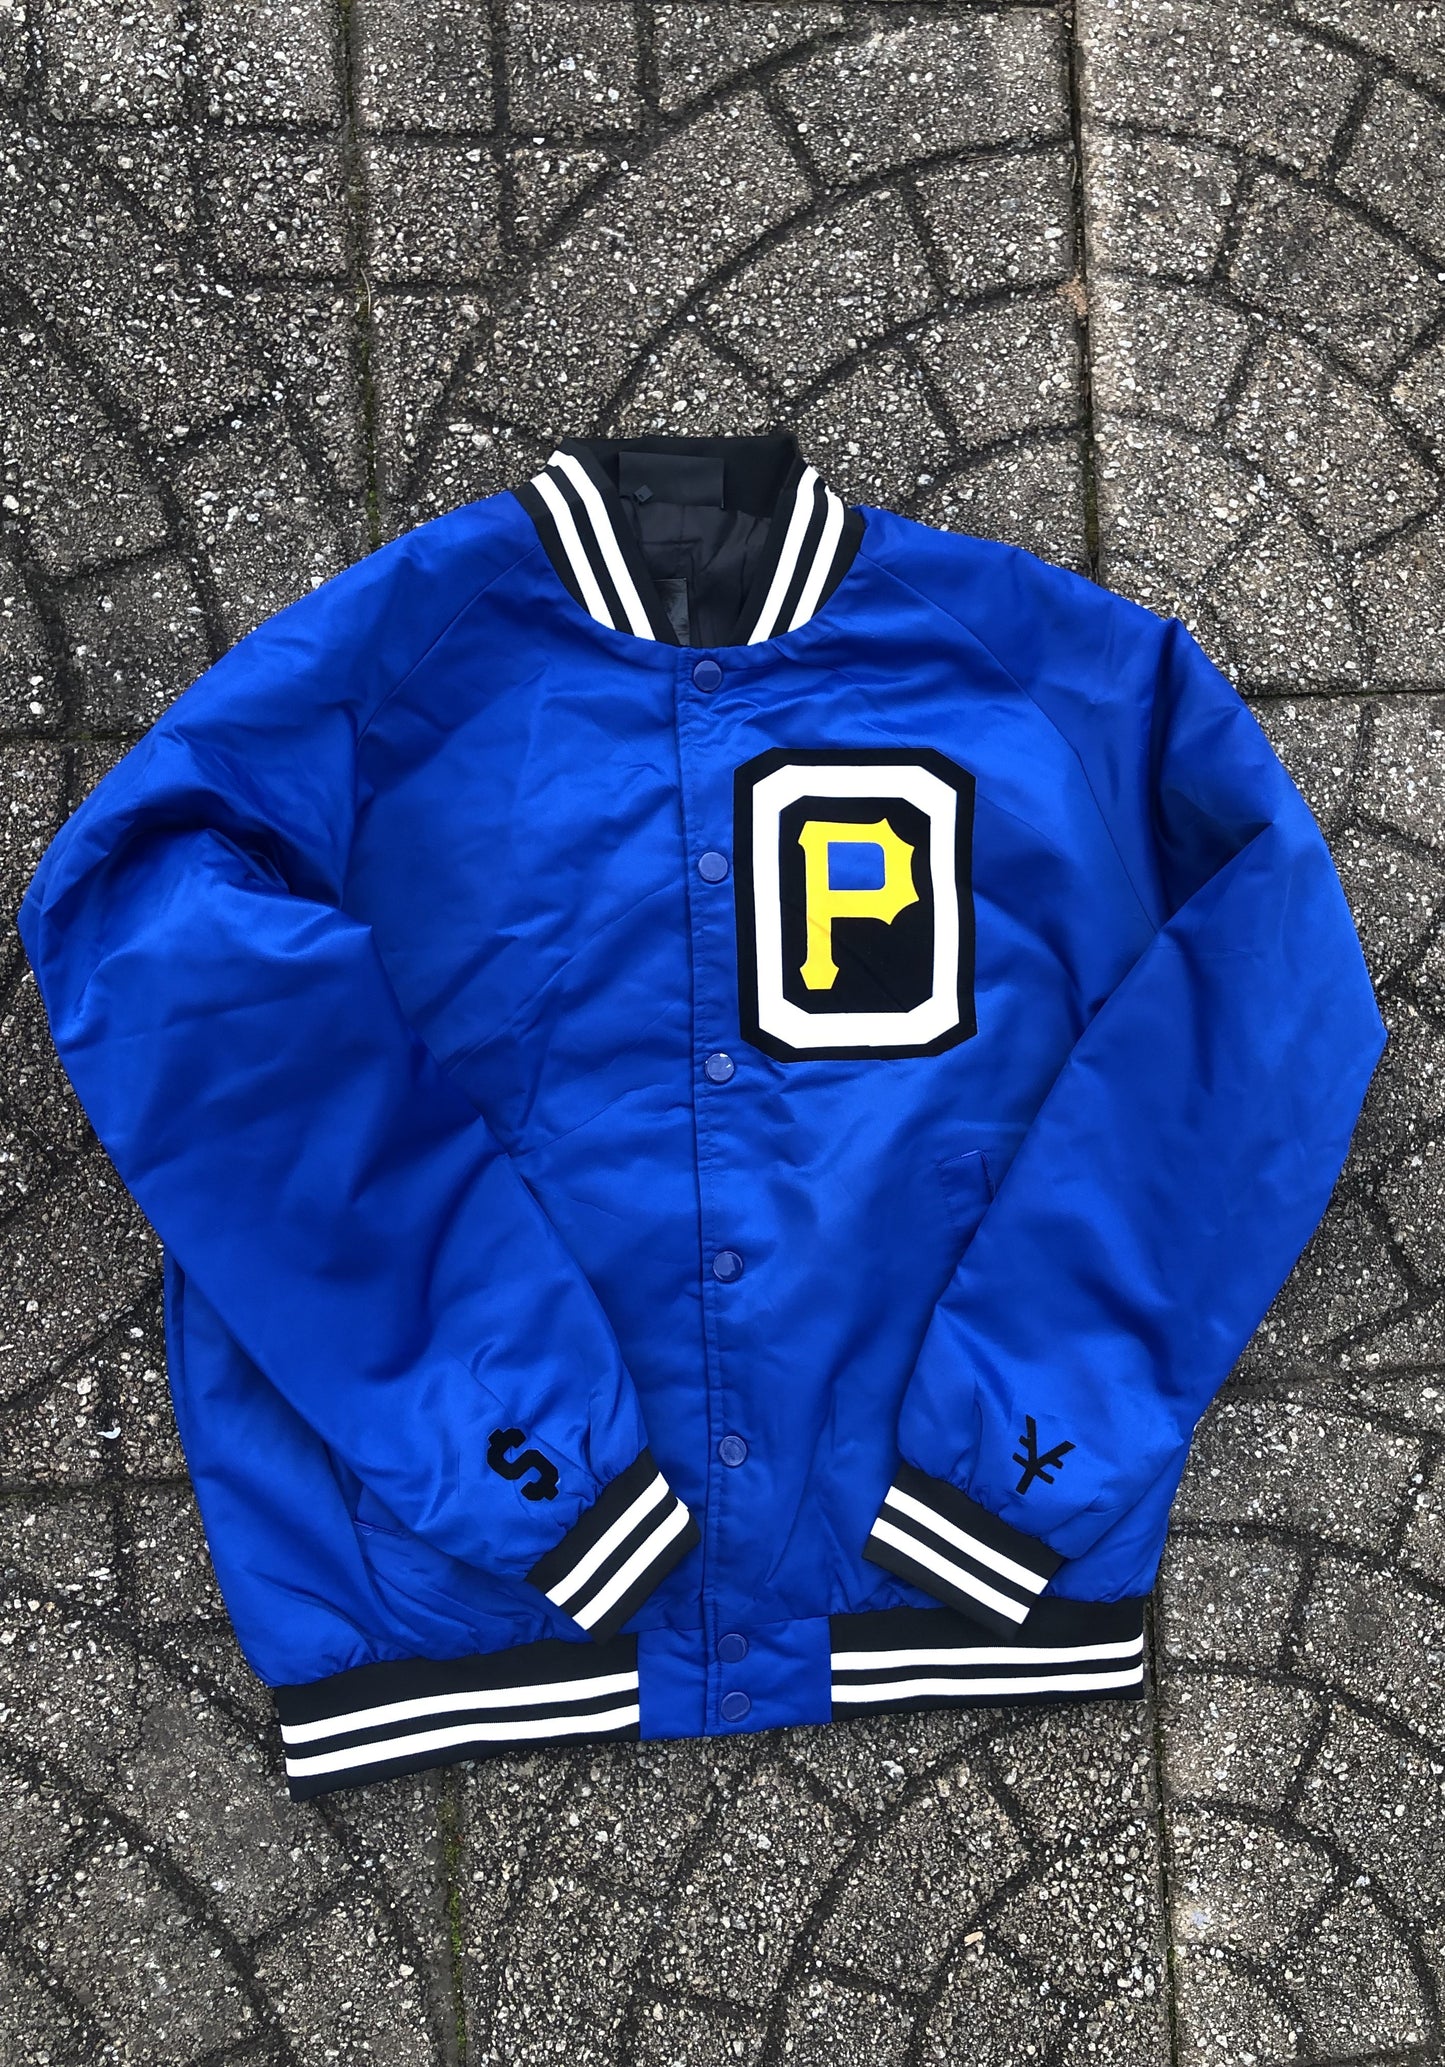 Players Only "MILLYENS" Bomber Jacket